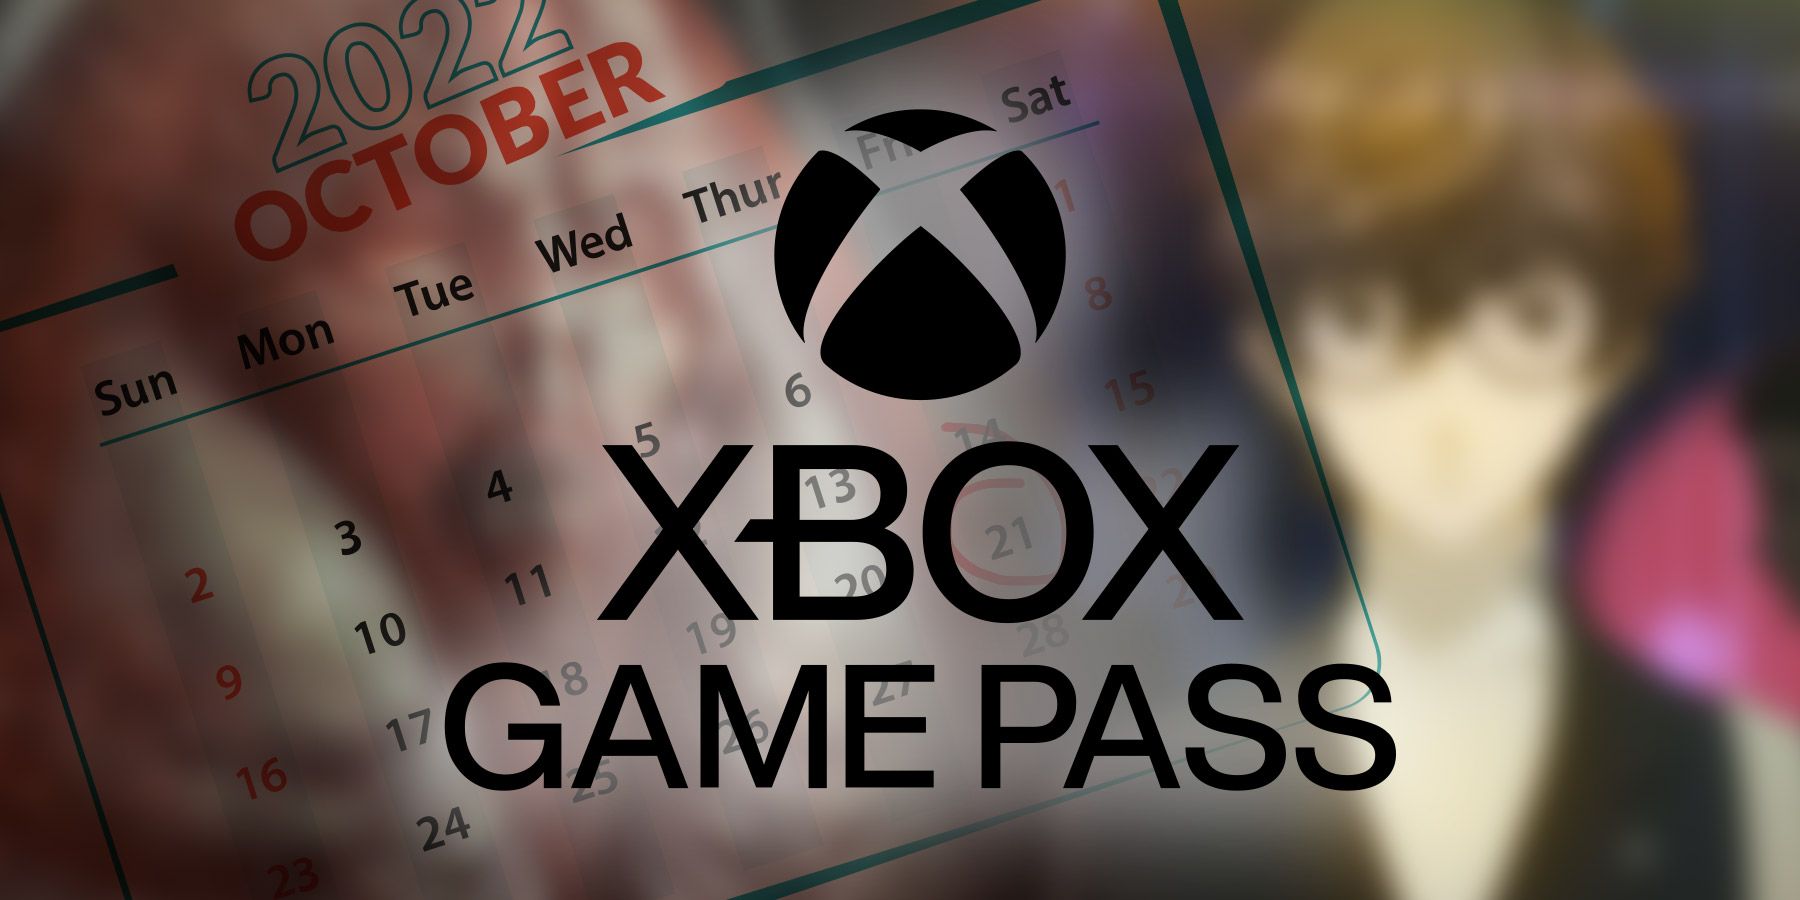 October's Xbox Game Pass titles include Dishonored 2 and World War Z